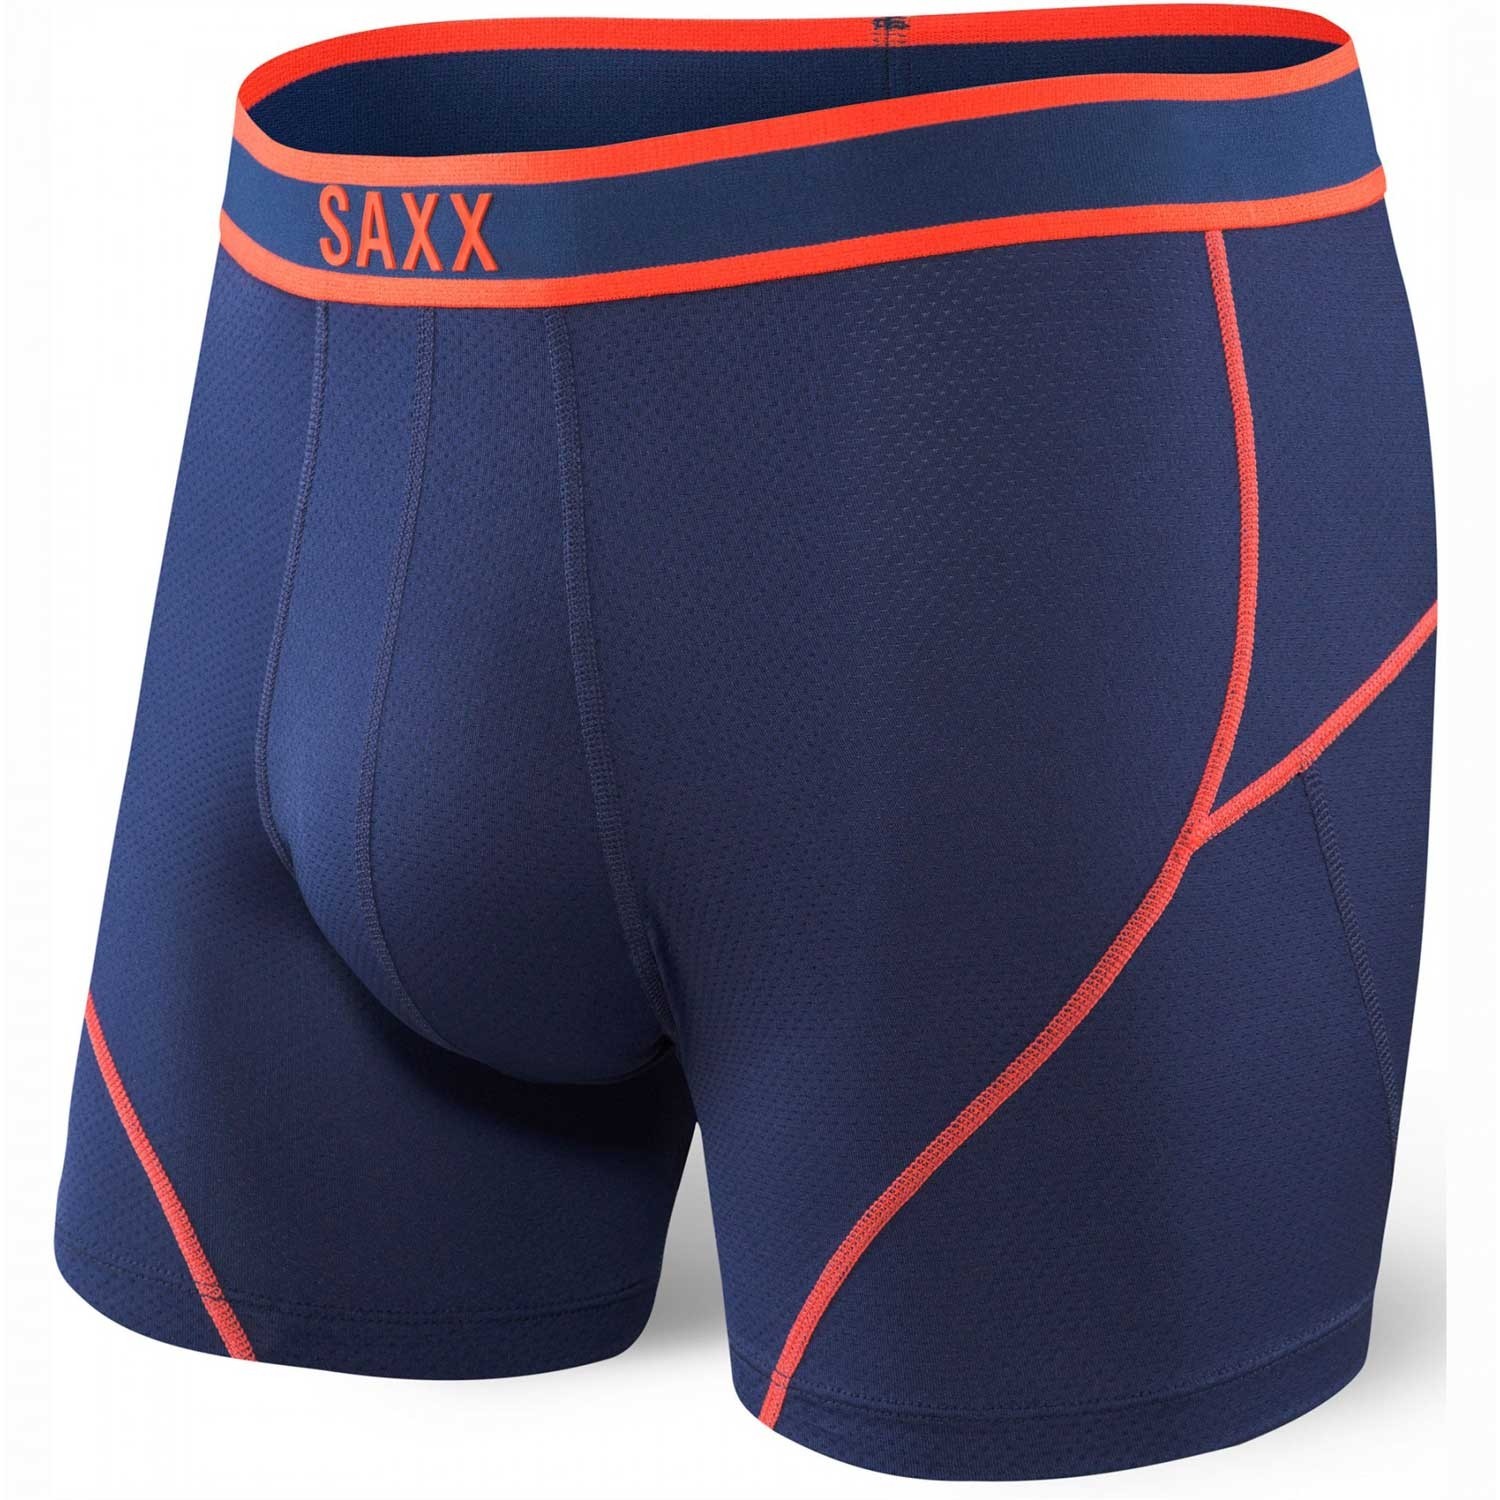 Saxx Underwear Co. Kinetic Boxer Brief - Shorts - Mens - Clothing